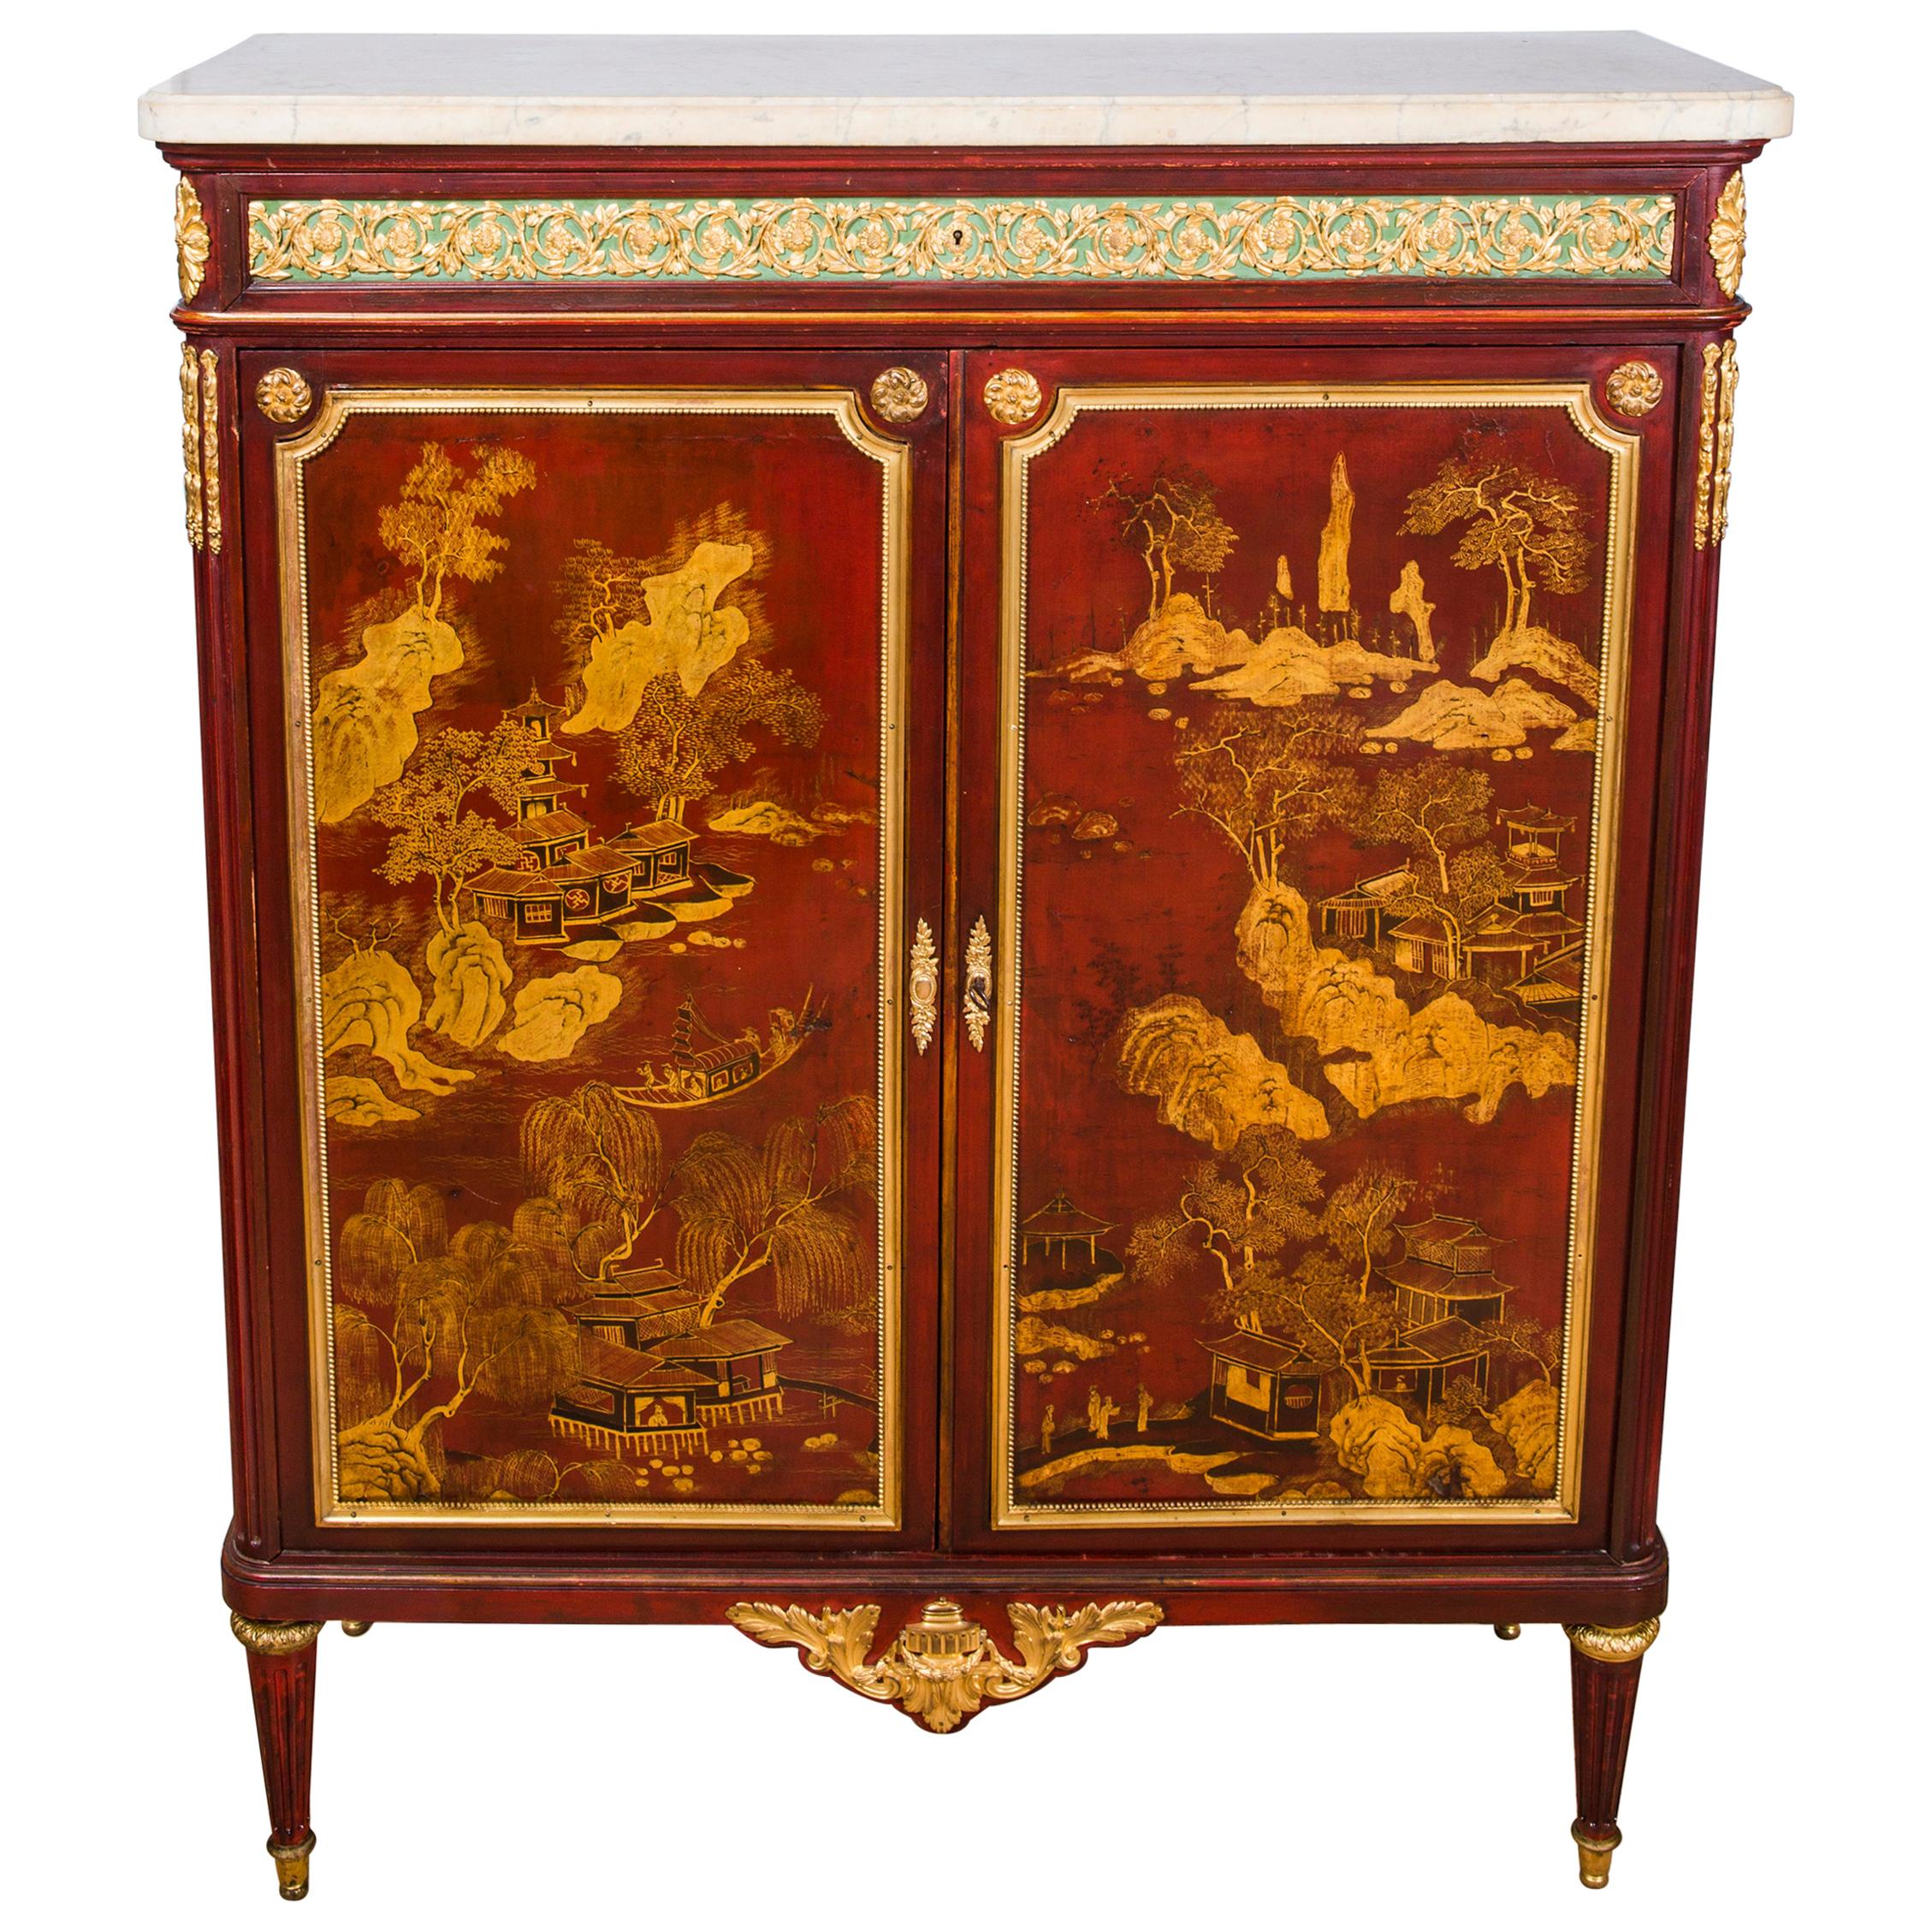 Paul Sormani 'French' Lacquer Louis XVI Style Chinoiseri Wood Cabinet